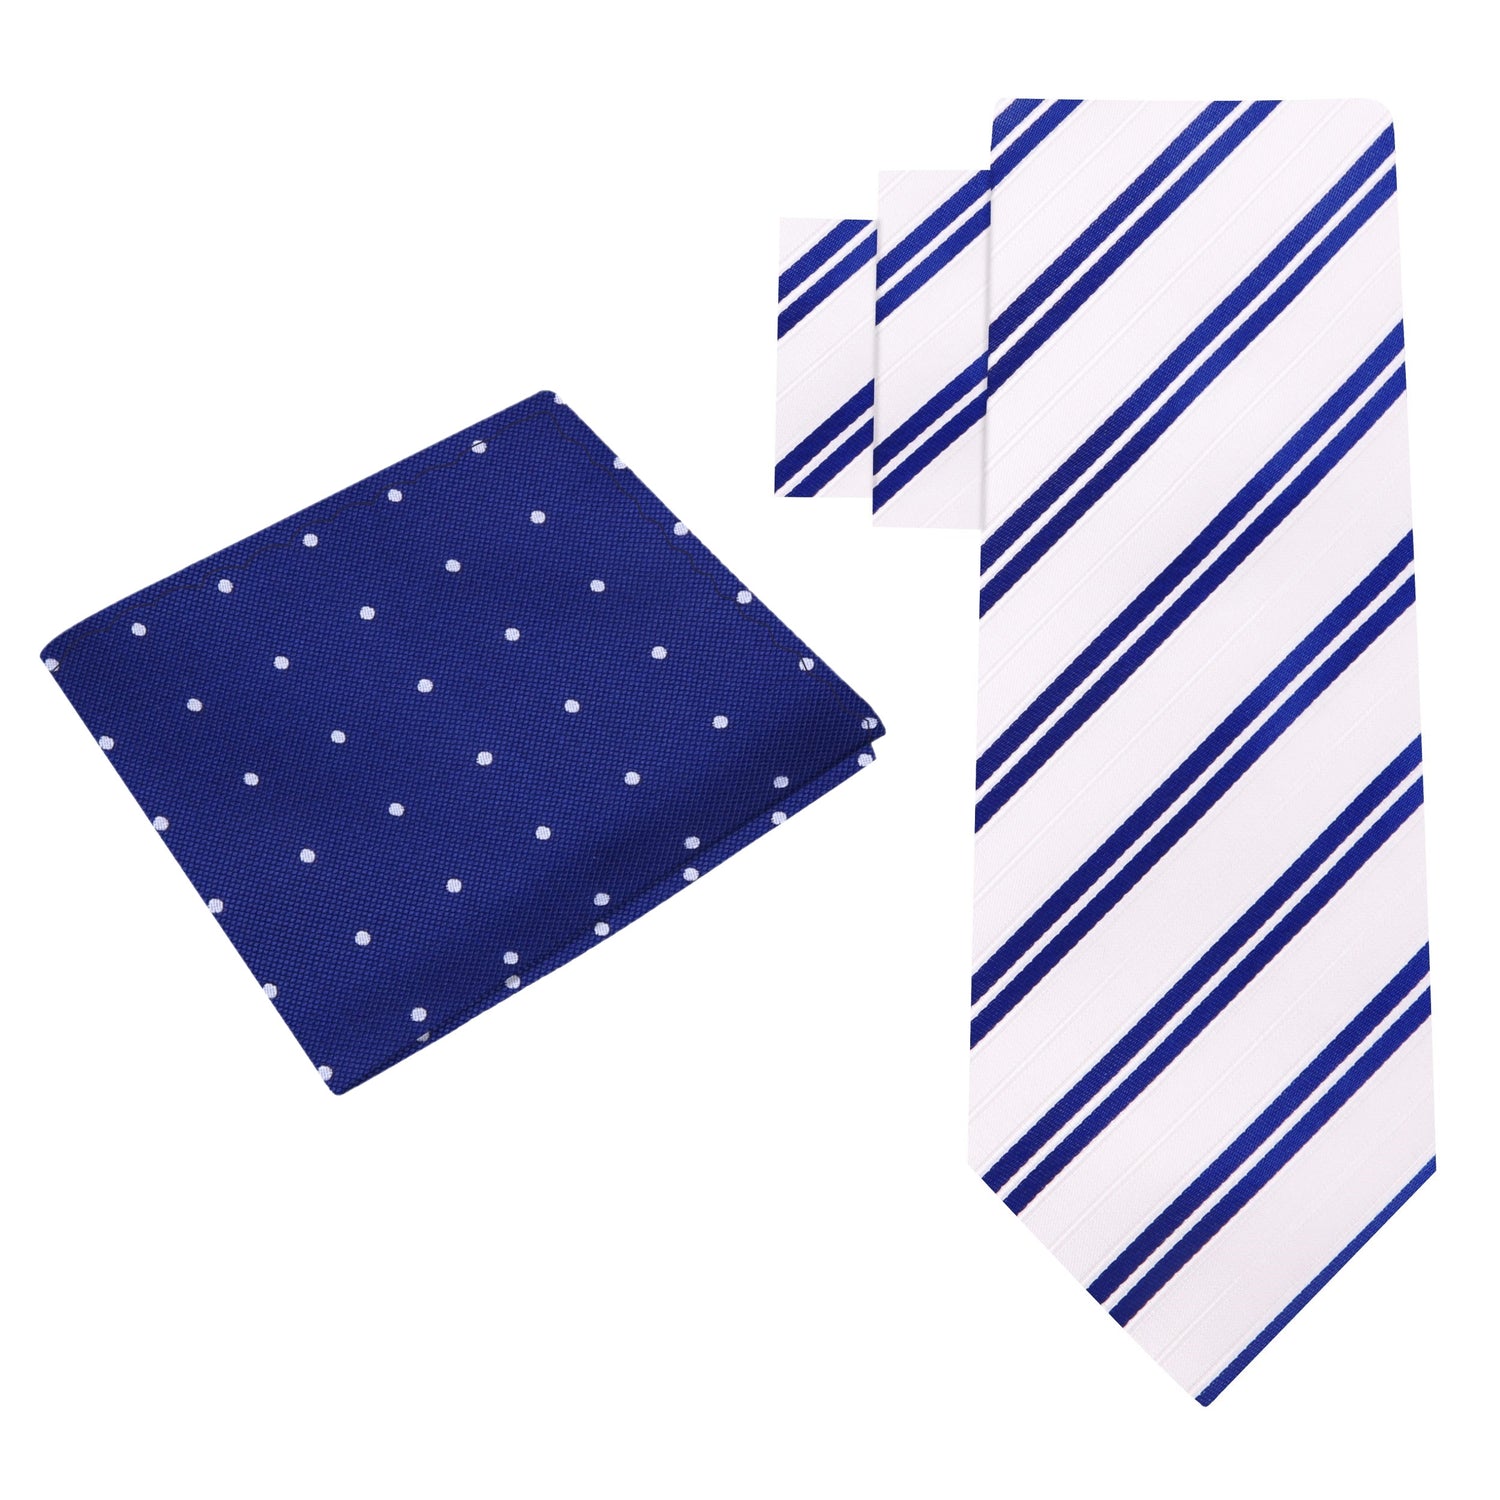 Alt View: White with Blue Stripe Necktie and Accenting Blue White Polka Square